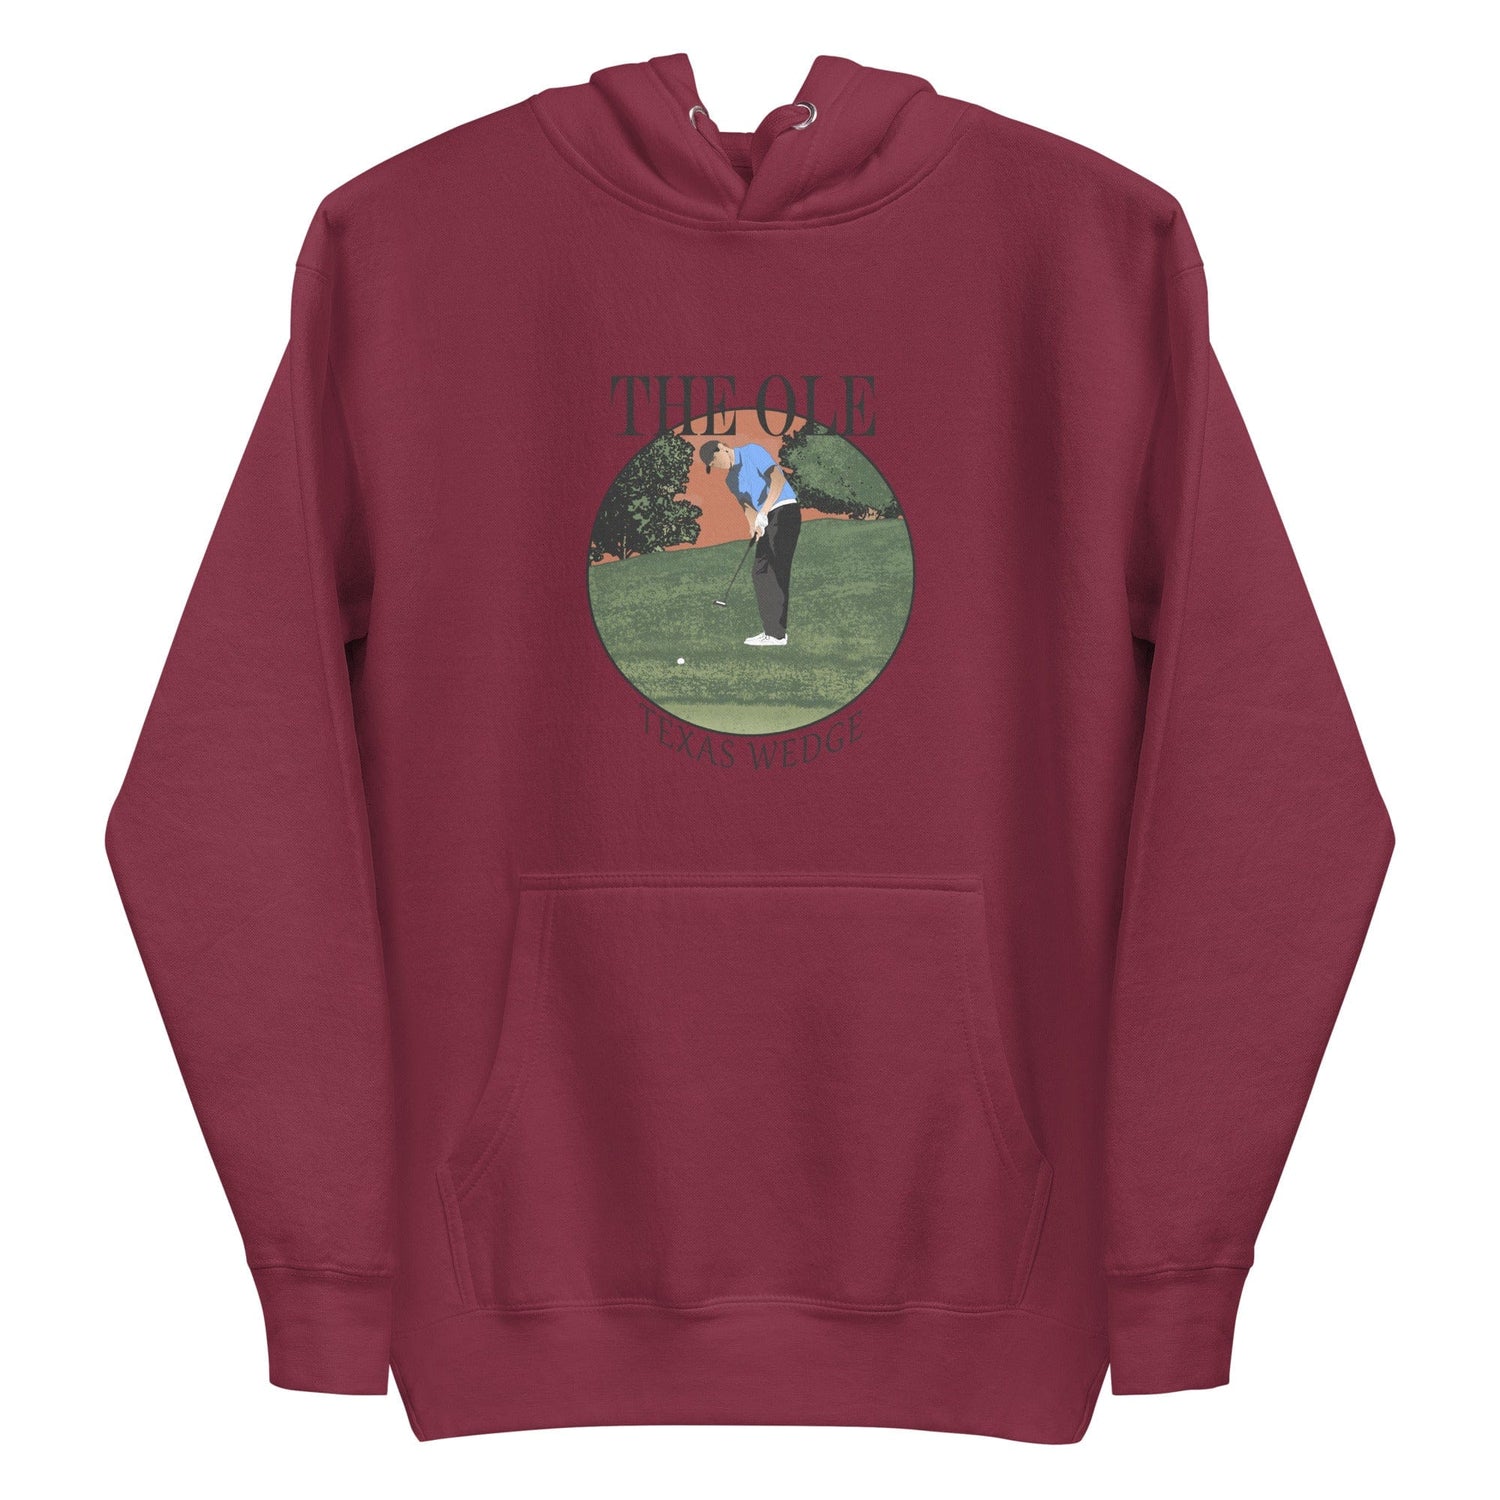 a red Texas Wedge Hoodie with a Cart Jockey Golf golf player on it.